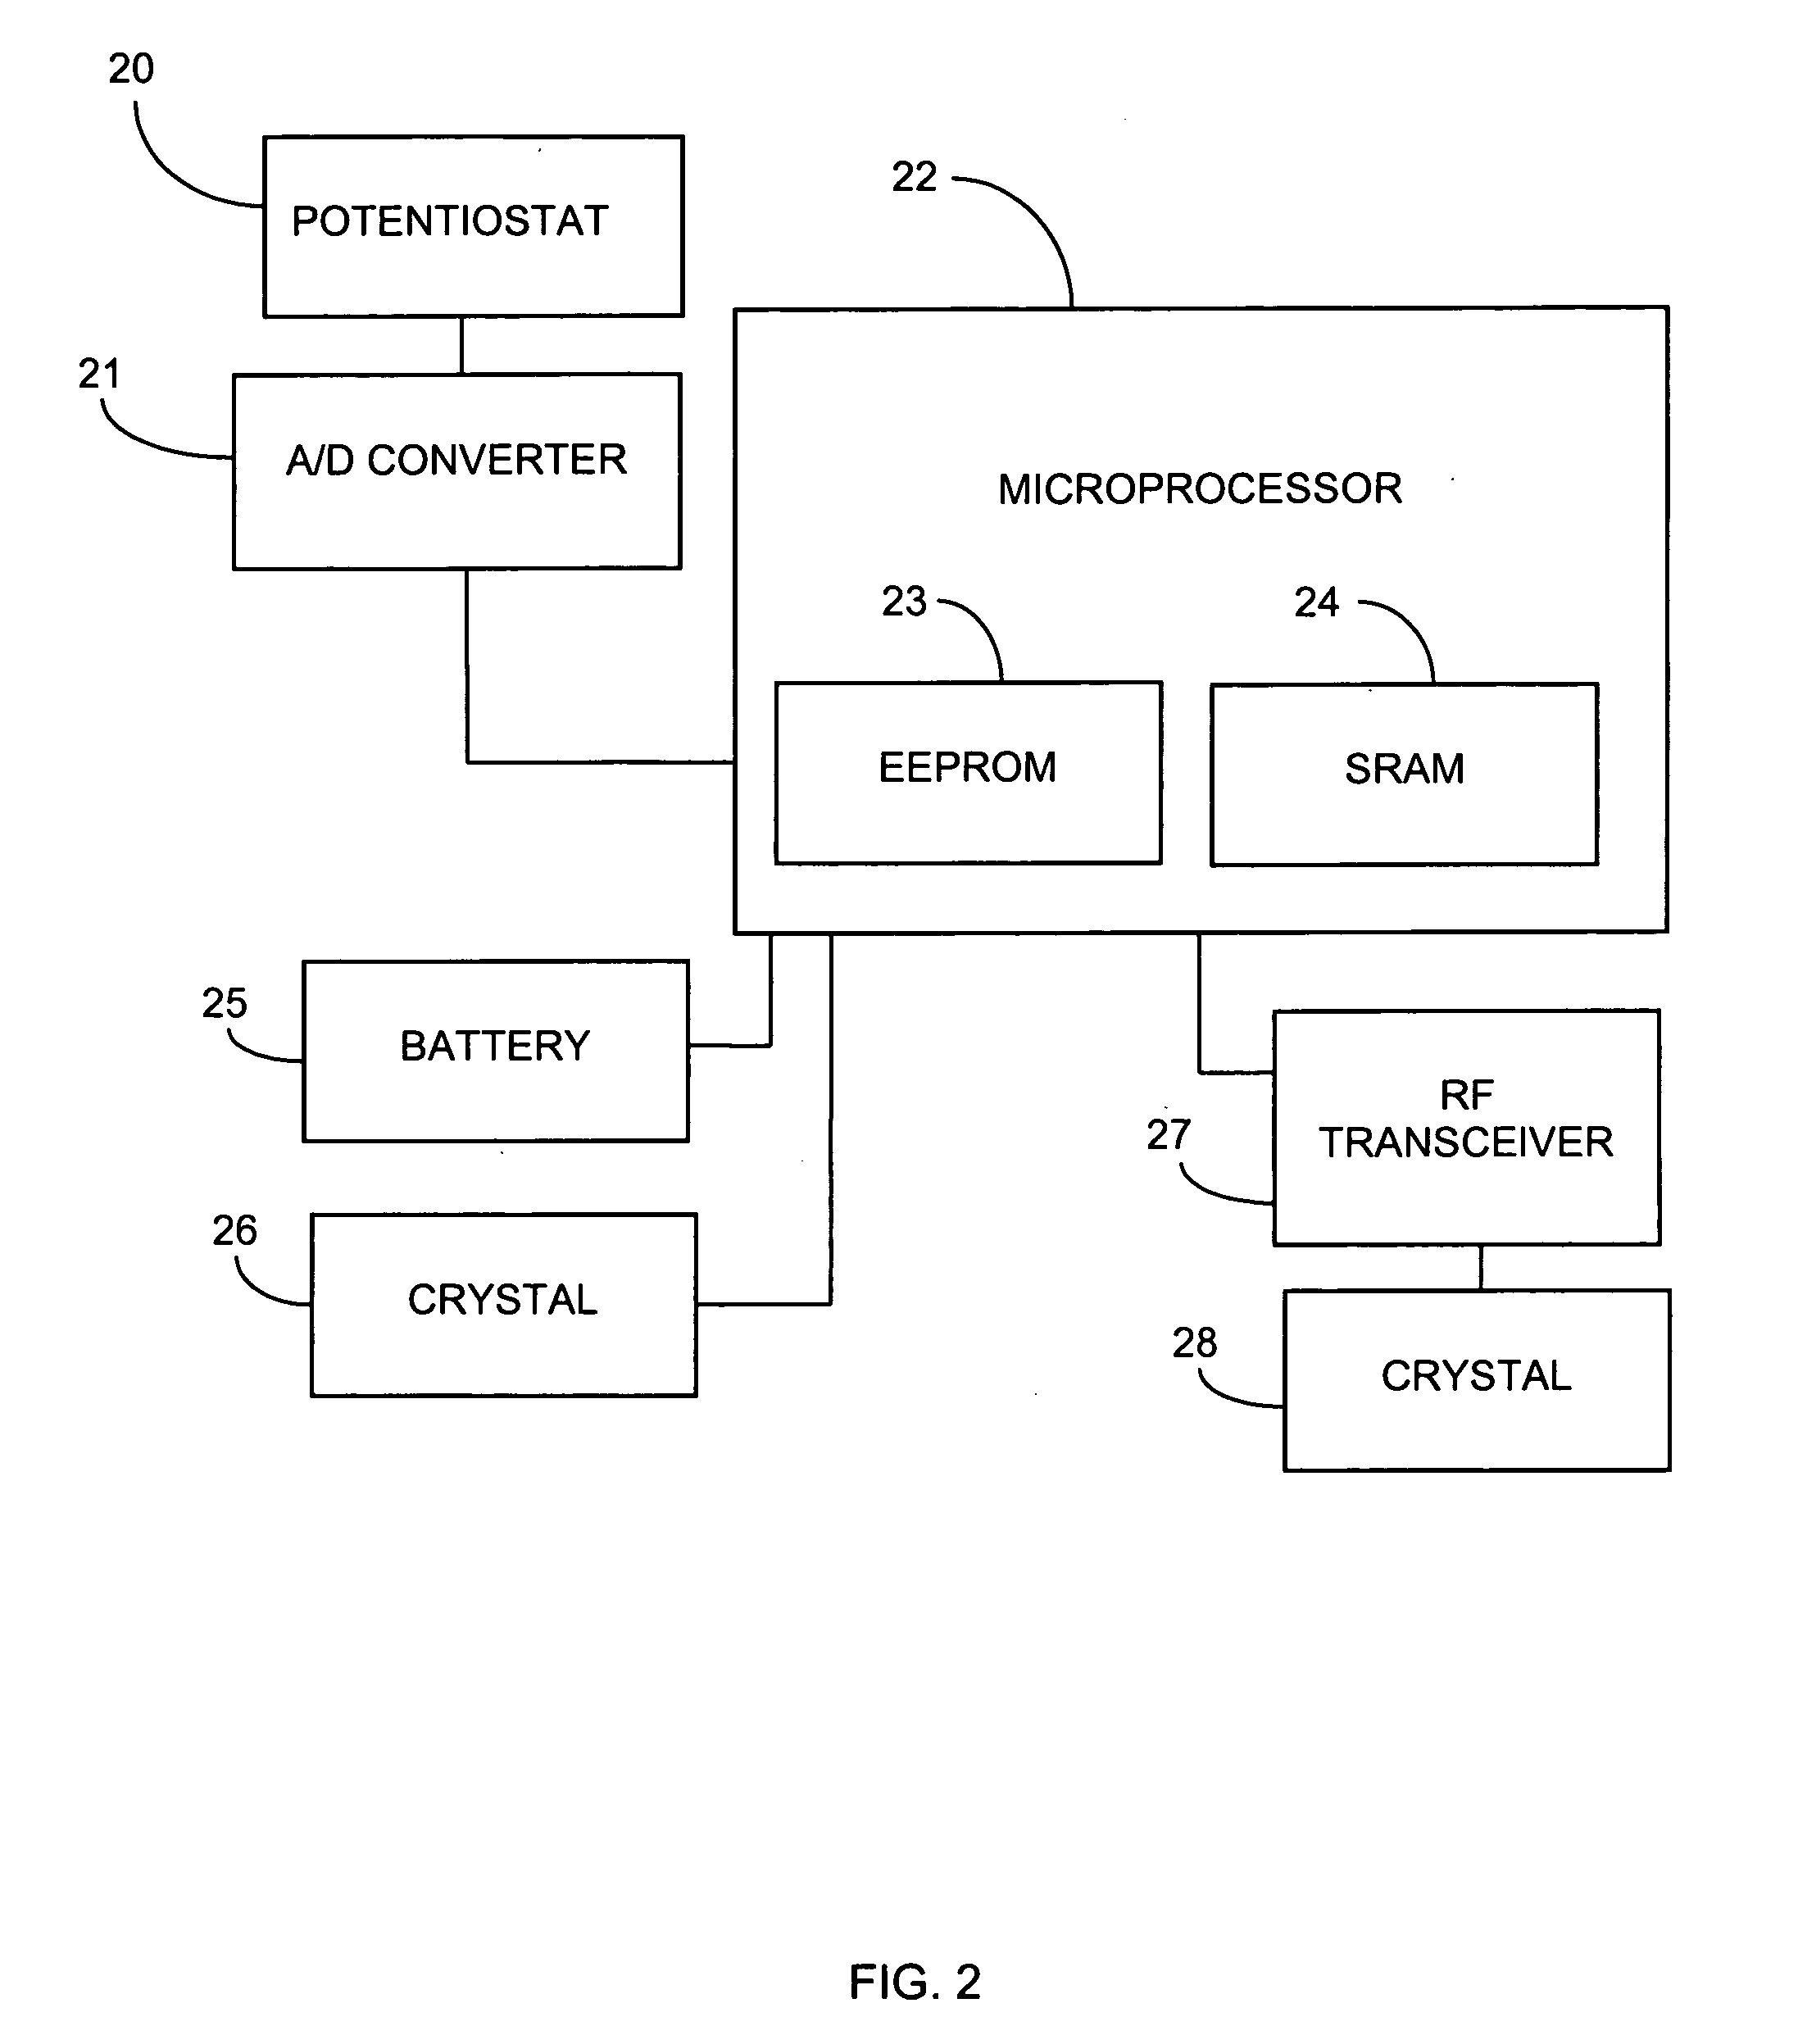 System and methods for processing analyte sensor data